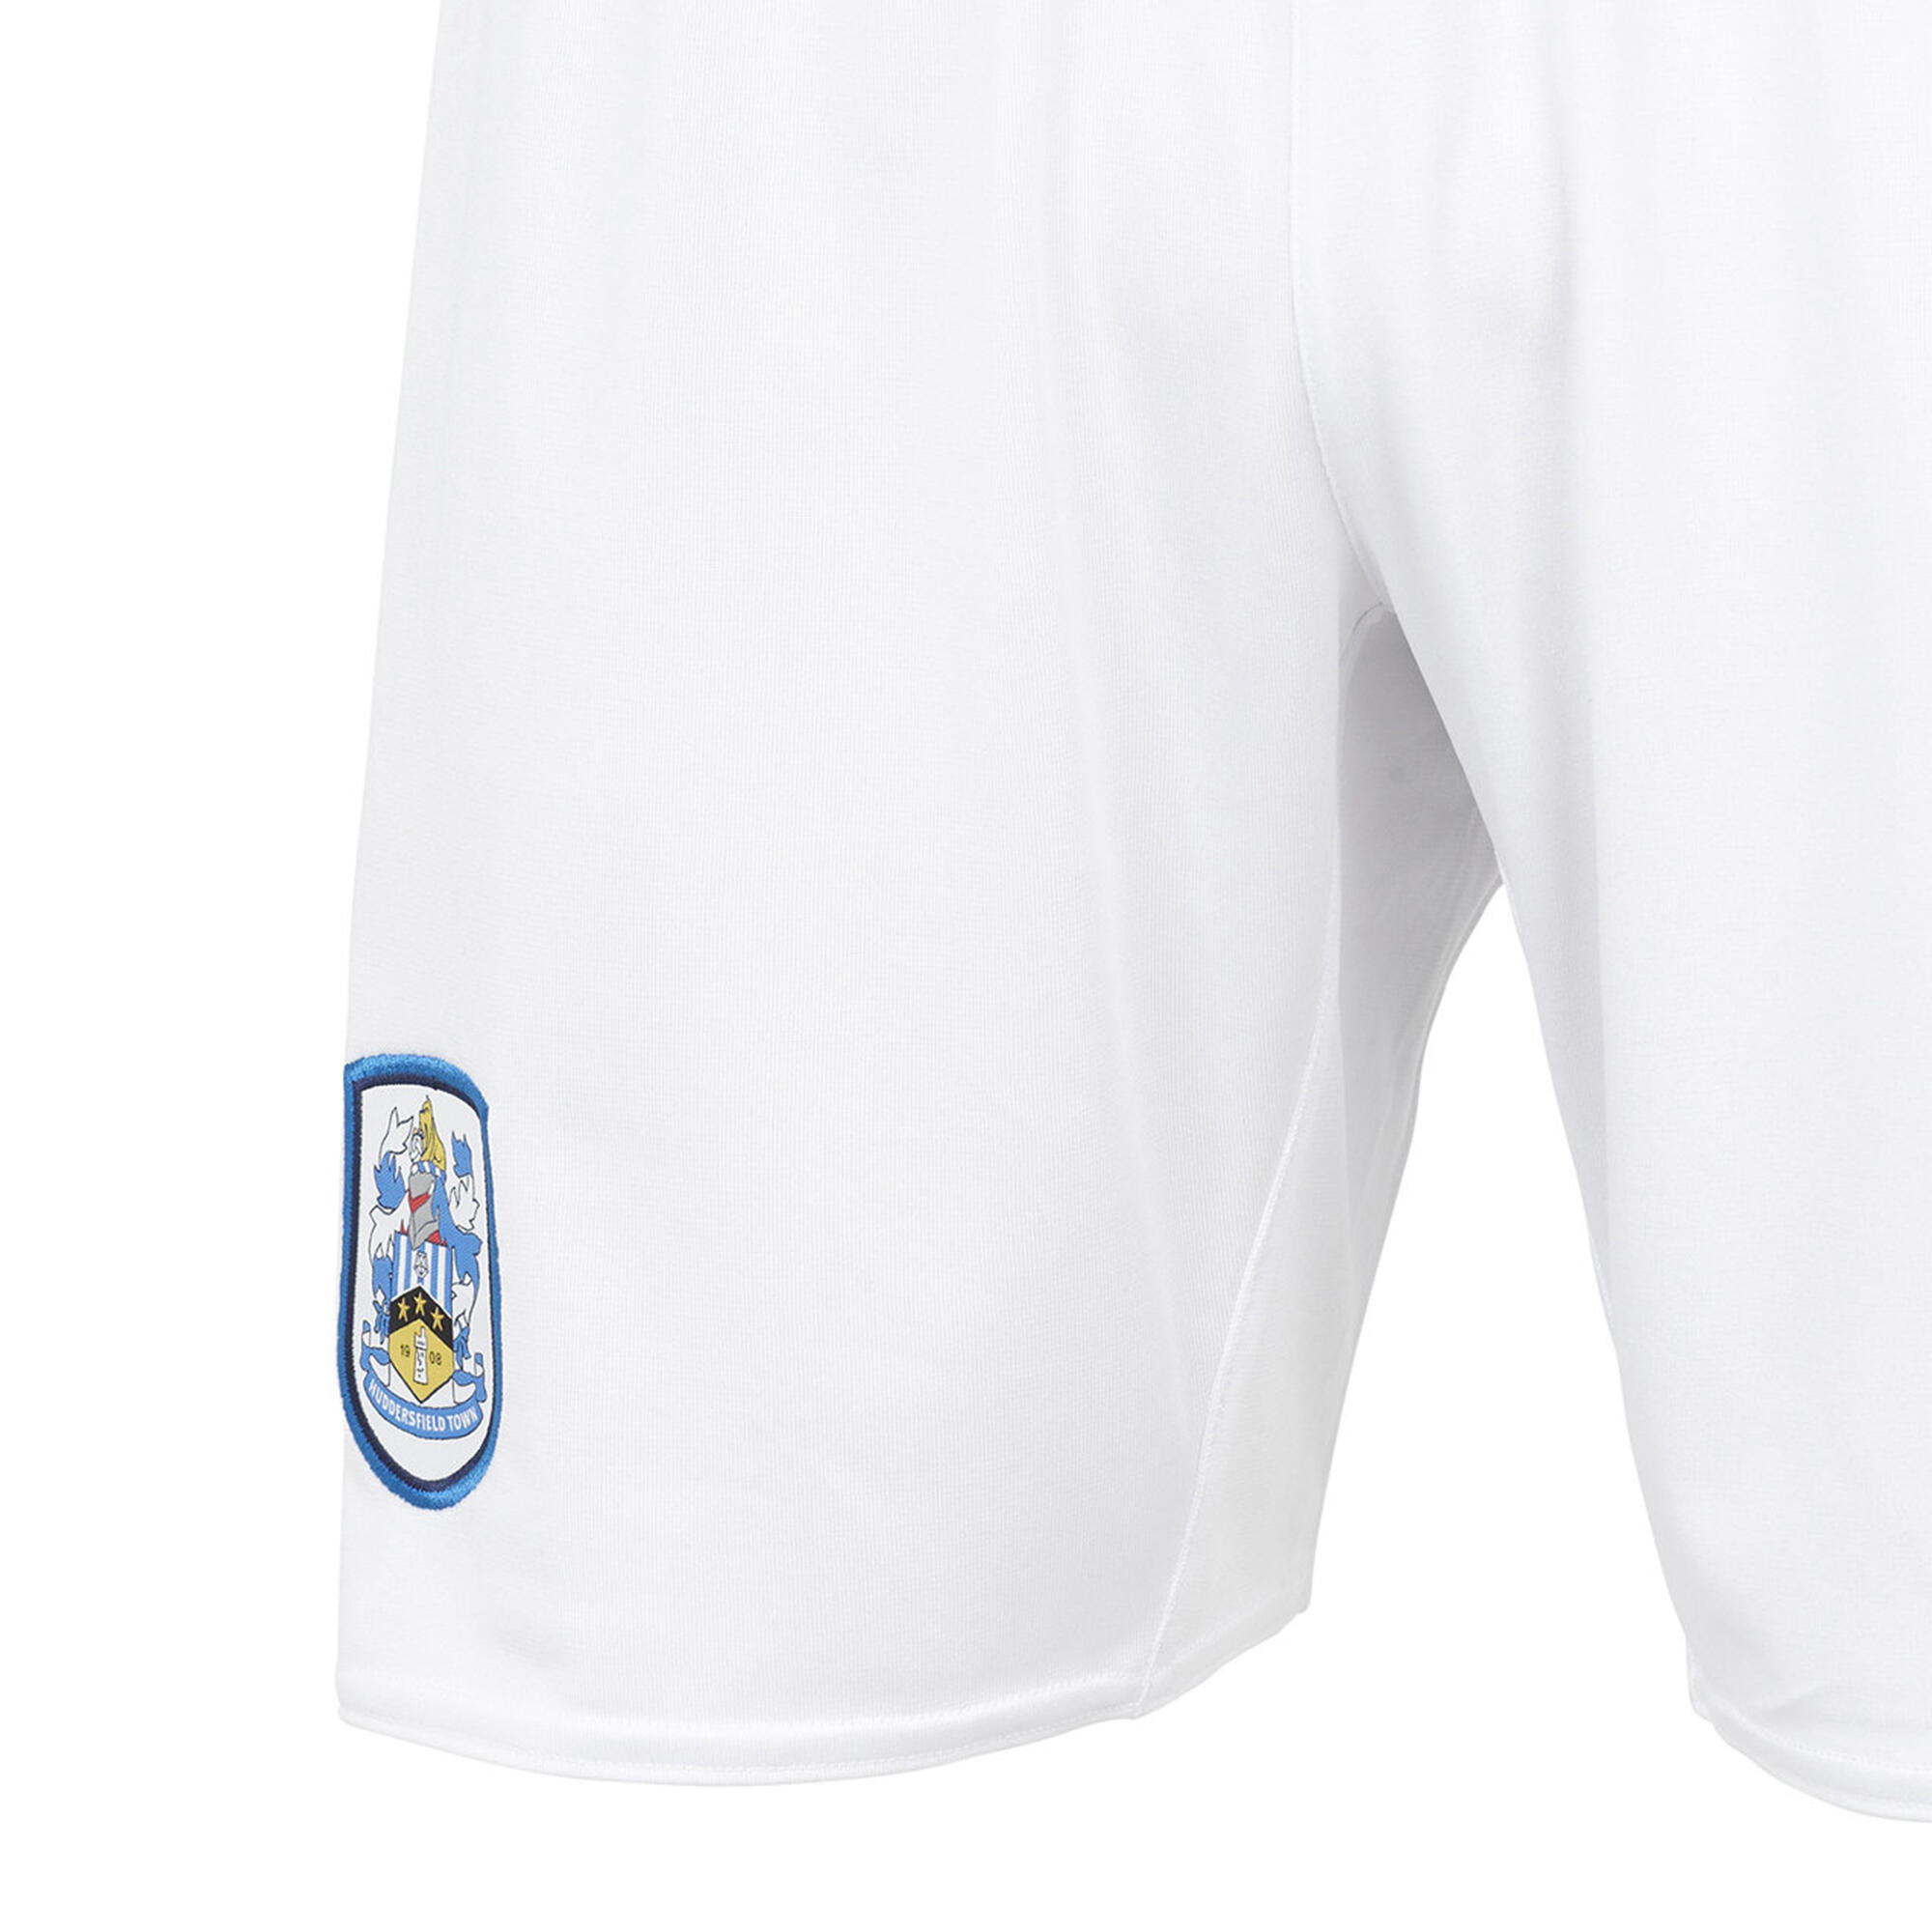 Huddersfield Town AFC Mens 20222023 Home Shorts (White) 3/4